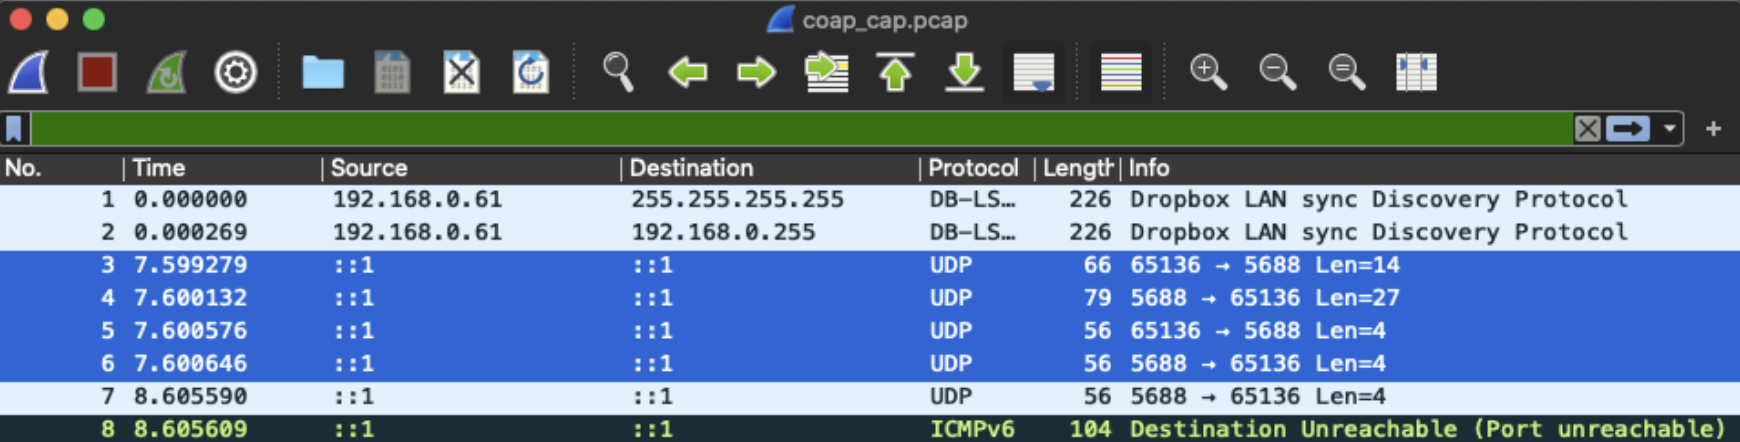 coap_packets